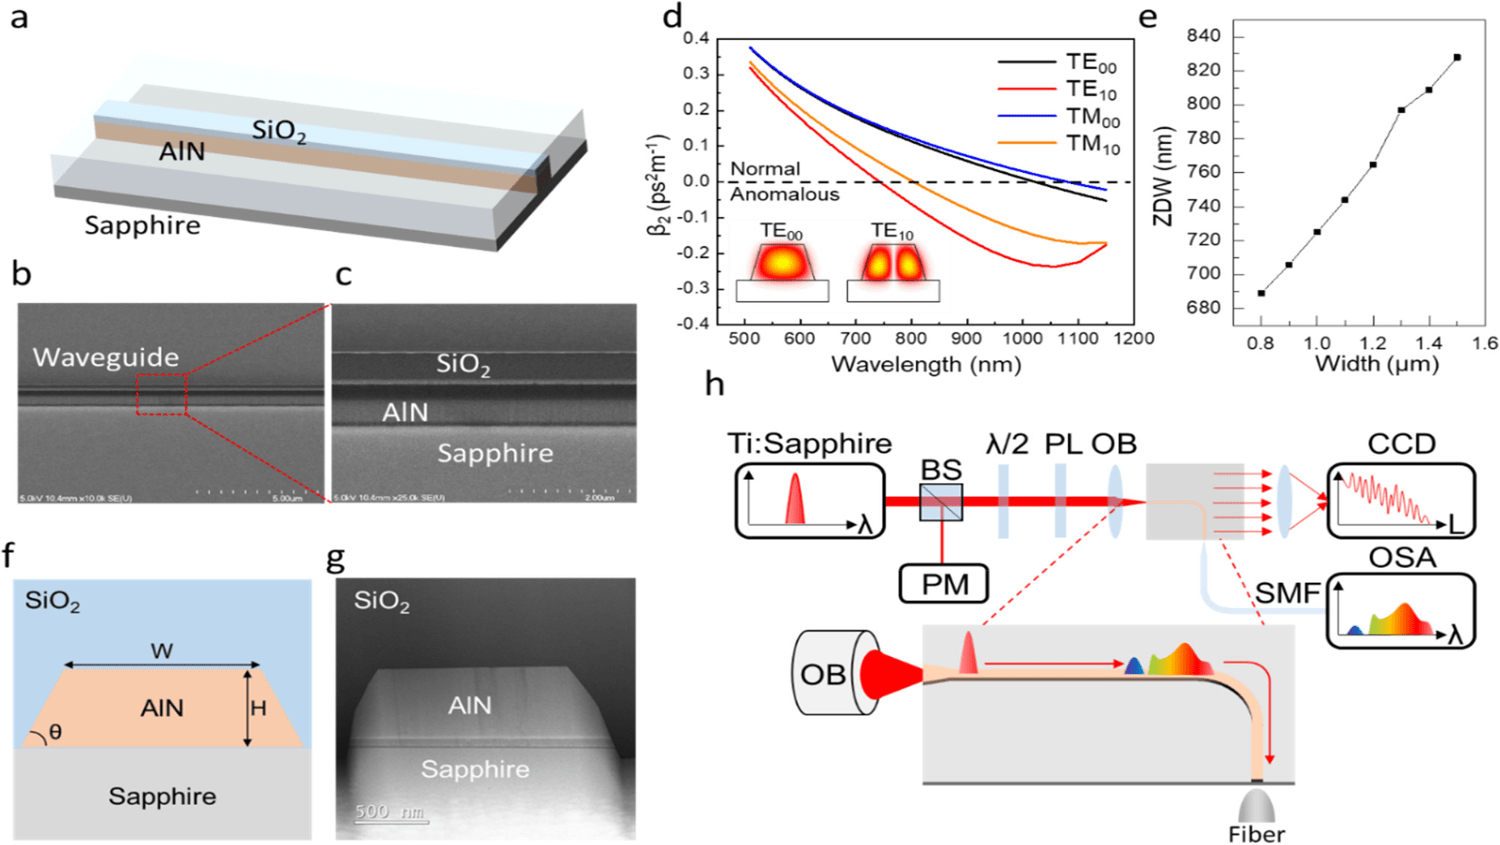 Chen's Paper on Supercontinuum Generation Published in ACS Photonics!